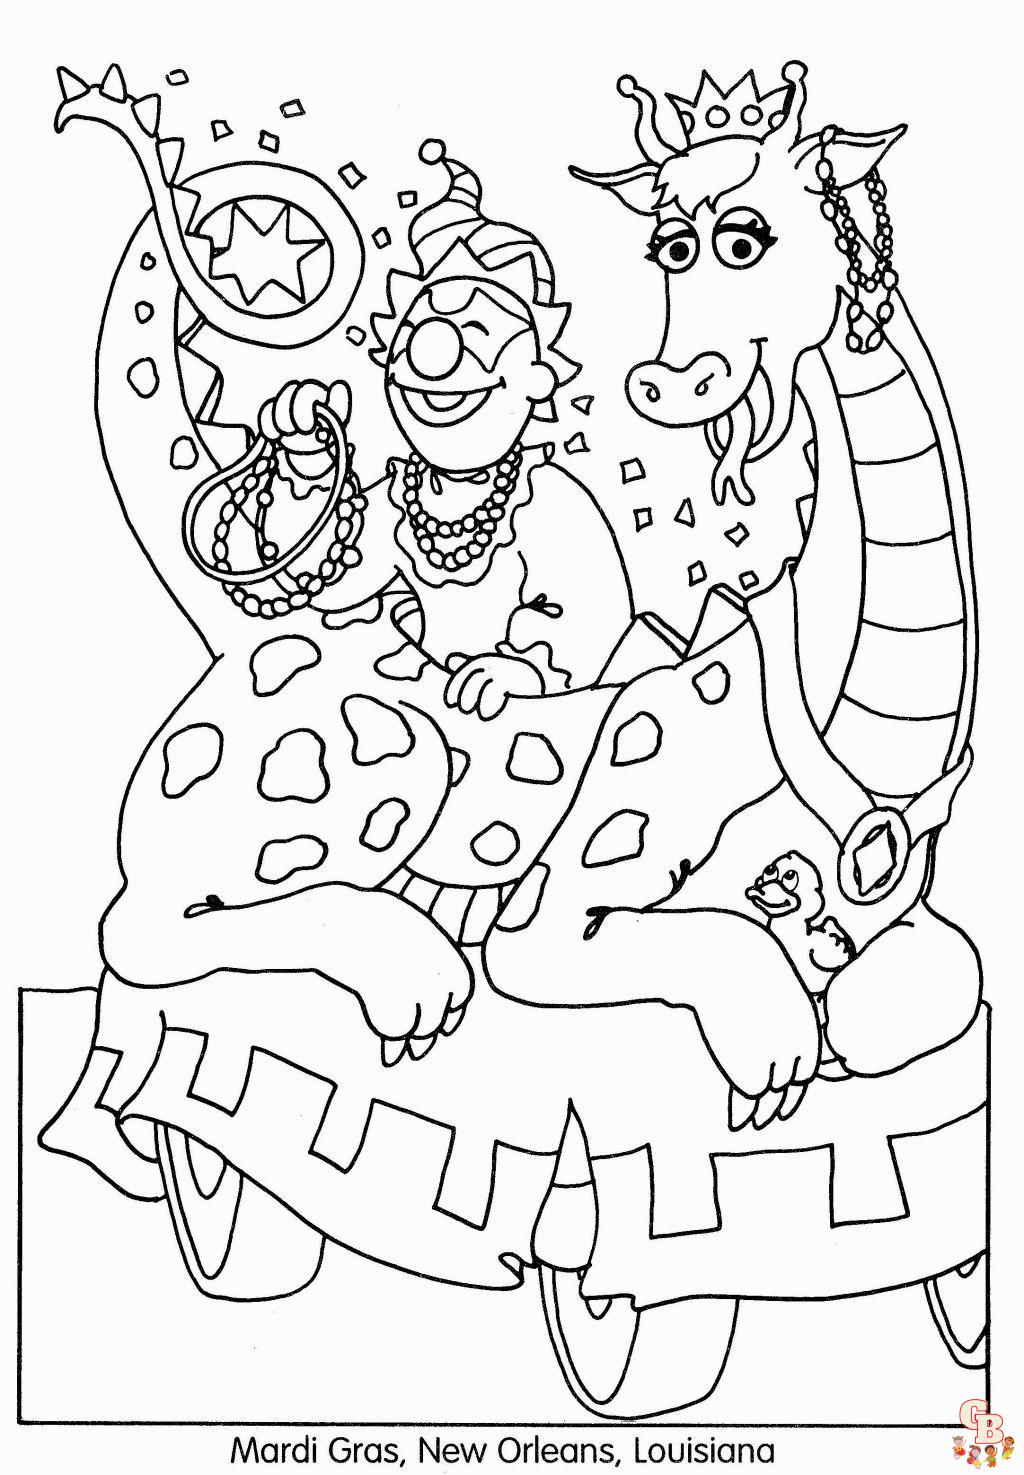 Mardi Gras coloring pages 3